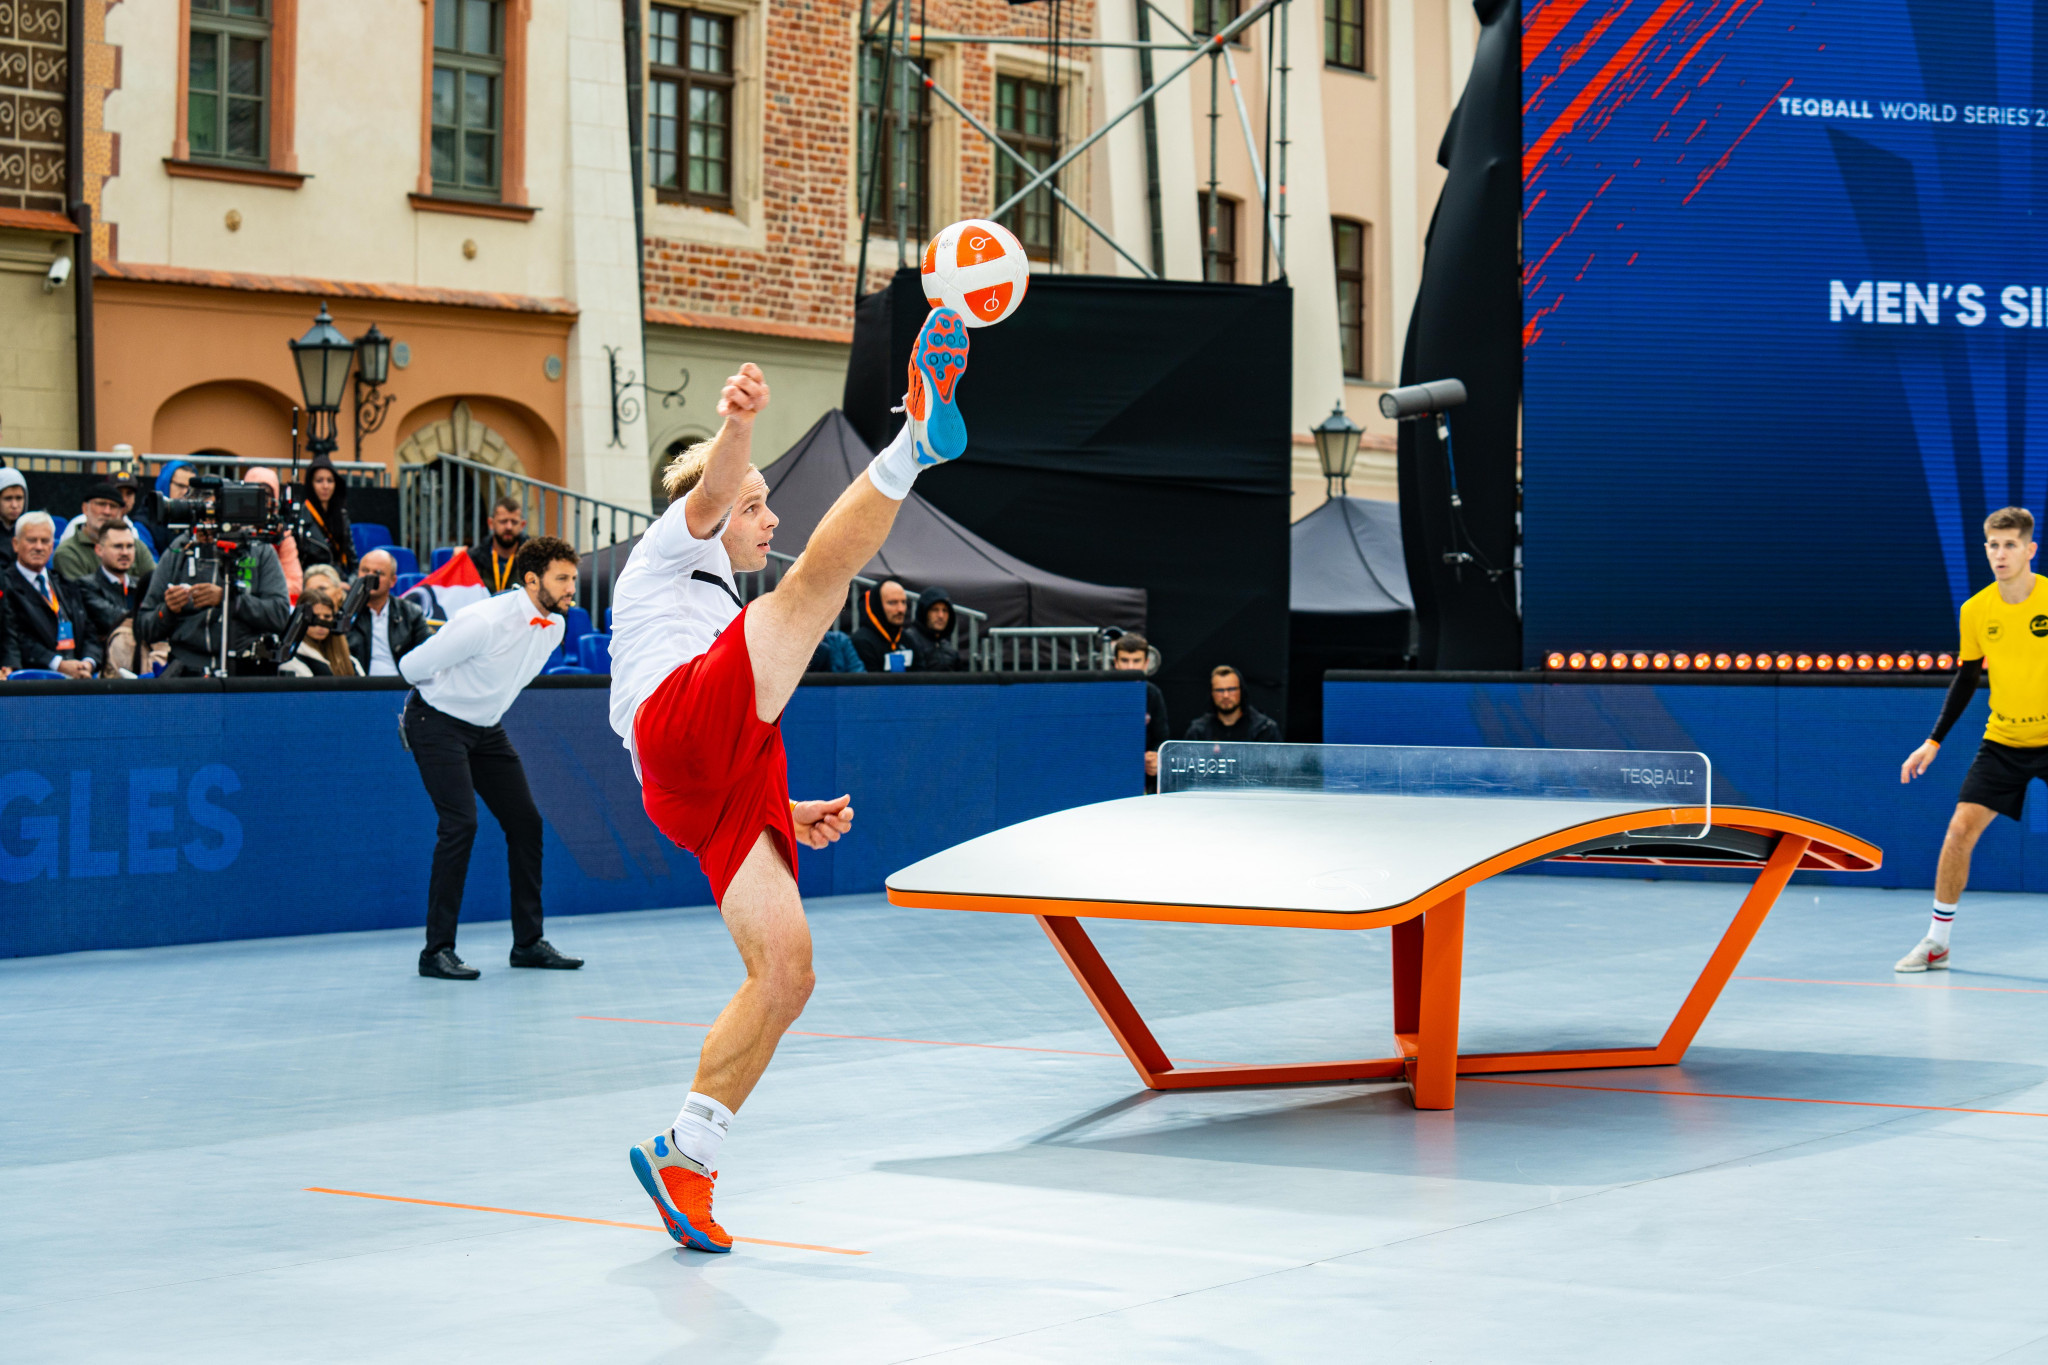 Nuremberg is due to host this year's Teqball World Championships ©FITEQ